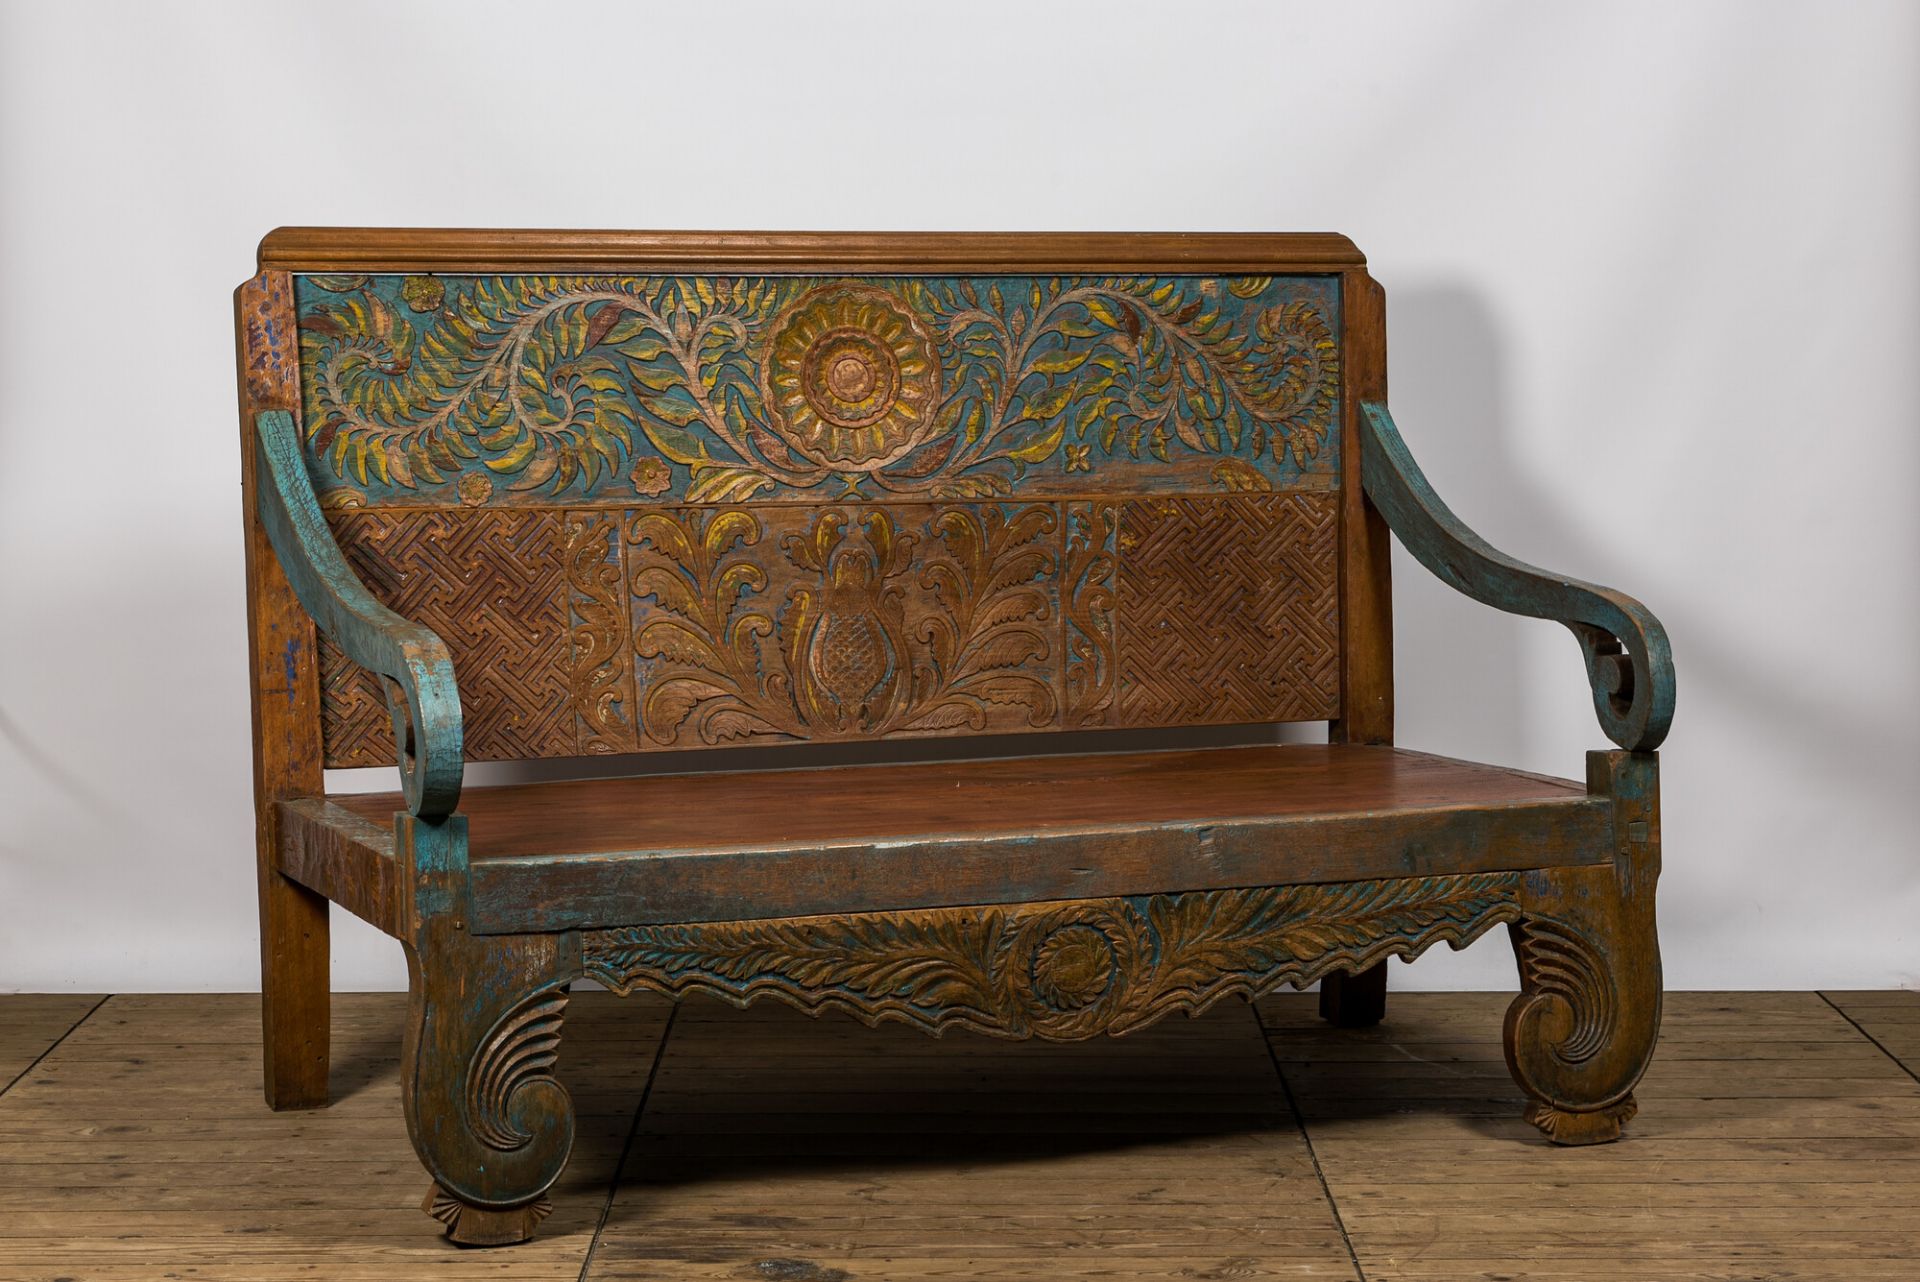 A large Indian polychrome wooden couch with floral design, 20th C. - Image 2 of 4